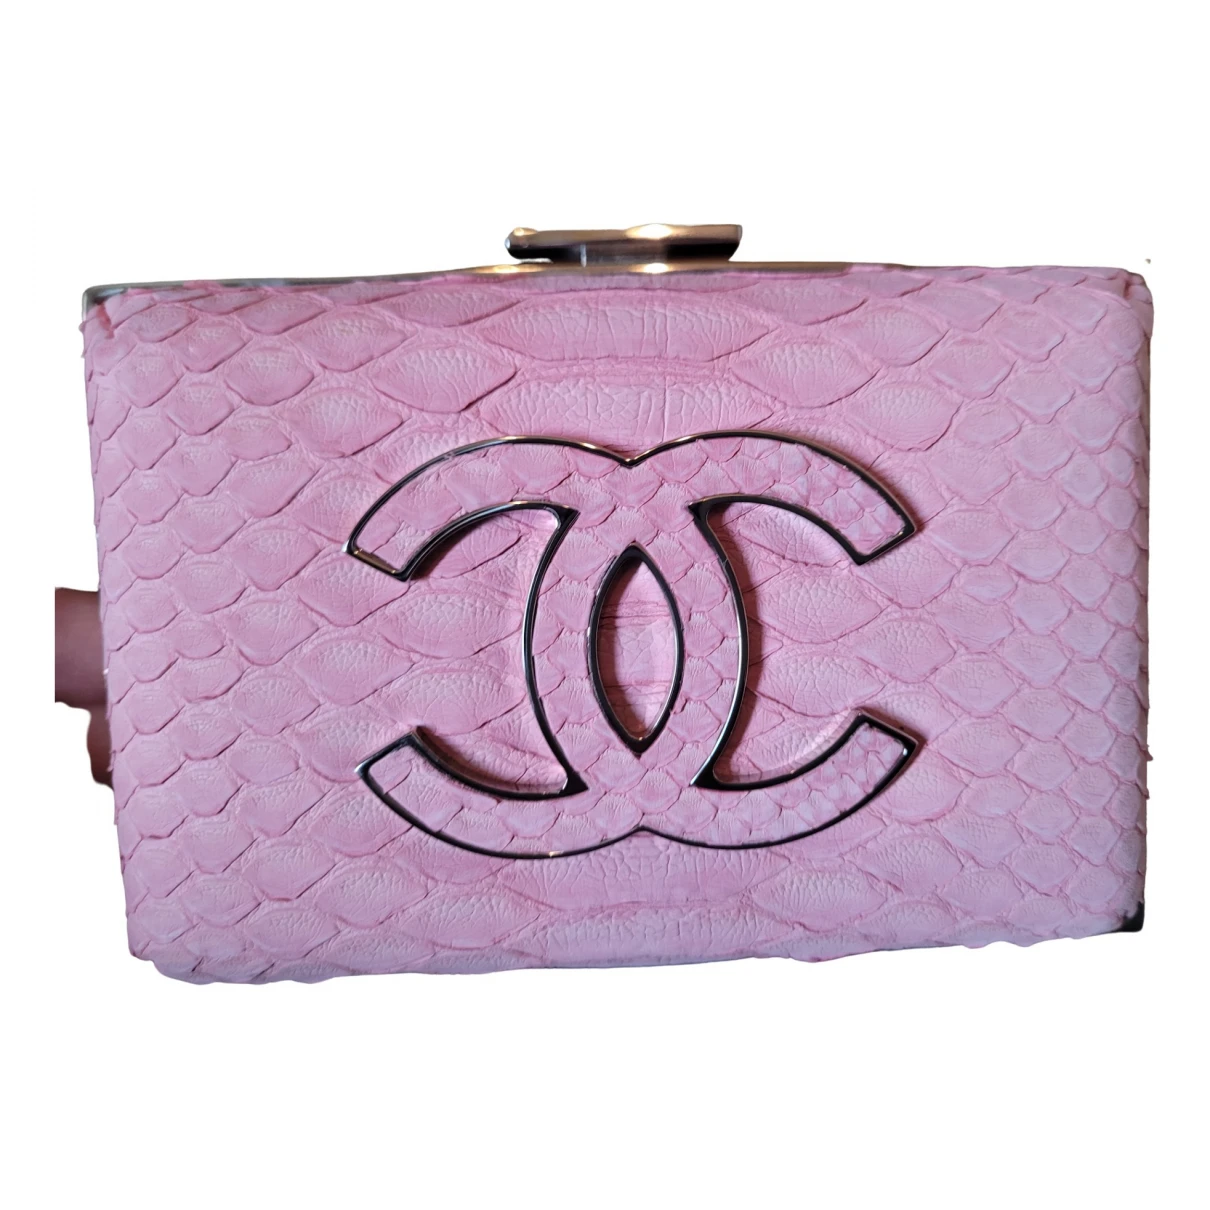 bags Chanel clutch bags for Female Python. Used condition